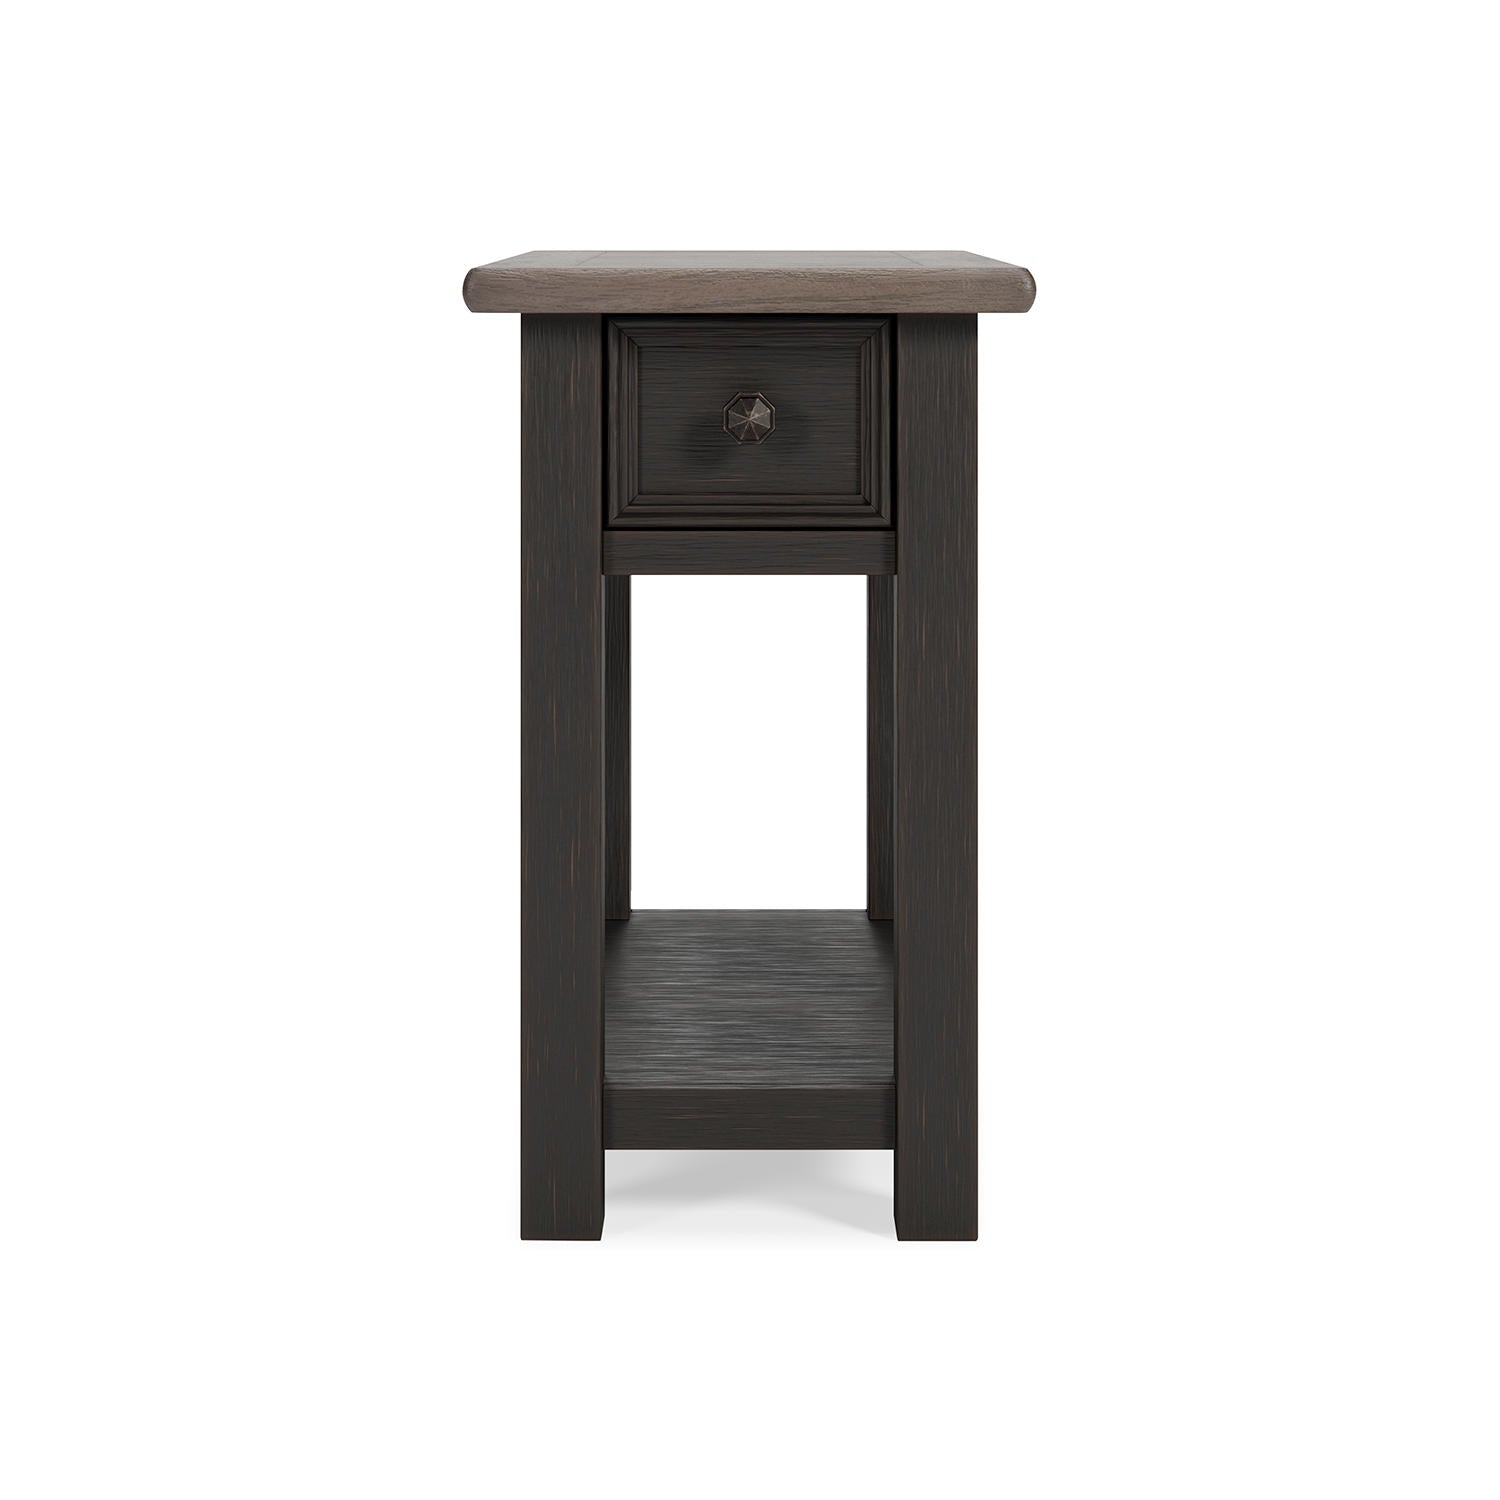 Tyler Creek Rectangular Chairside End Table - Two-tone